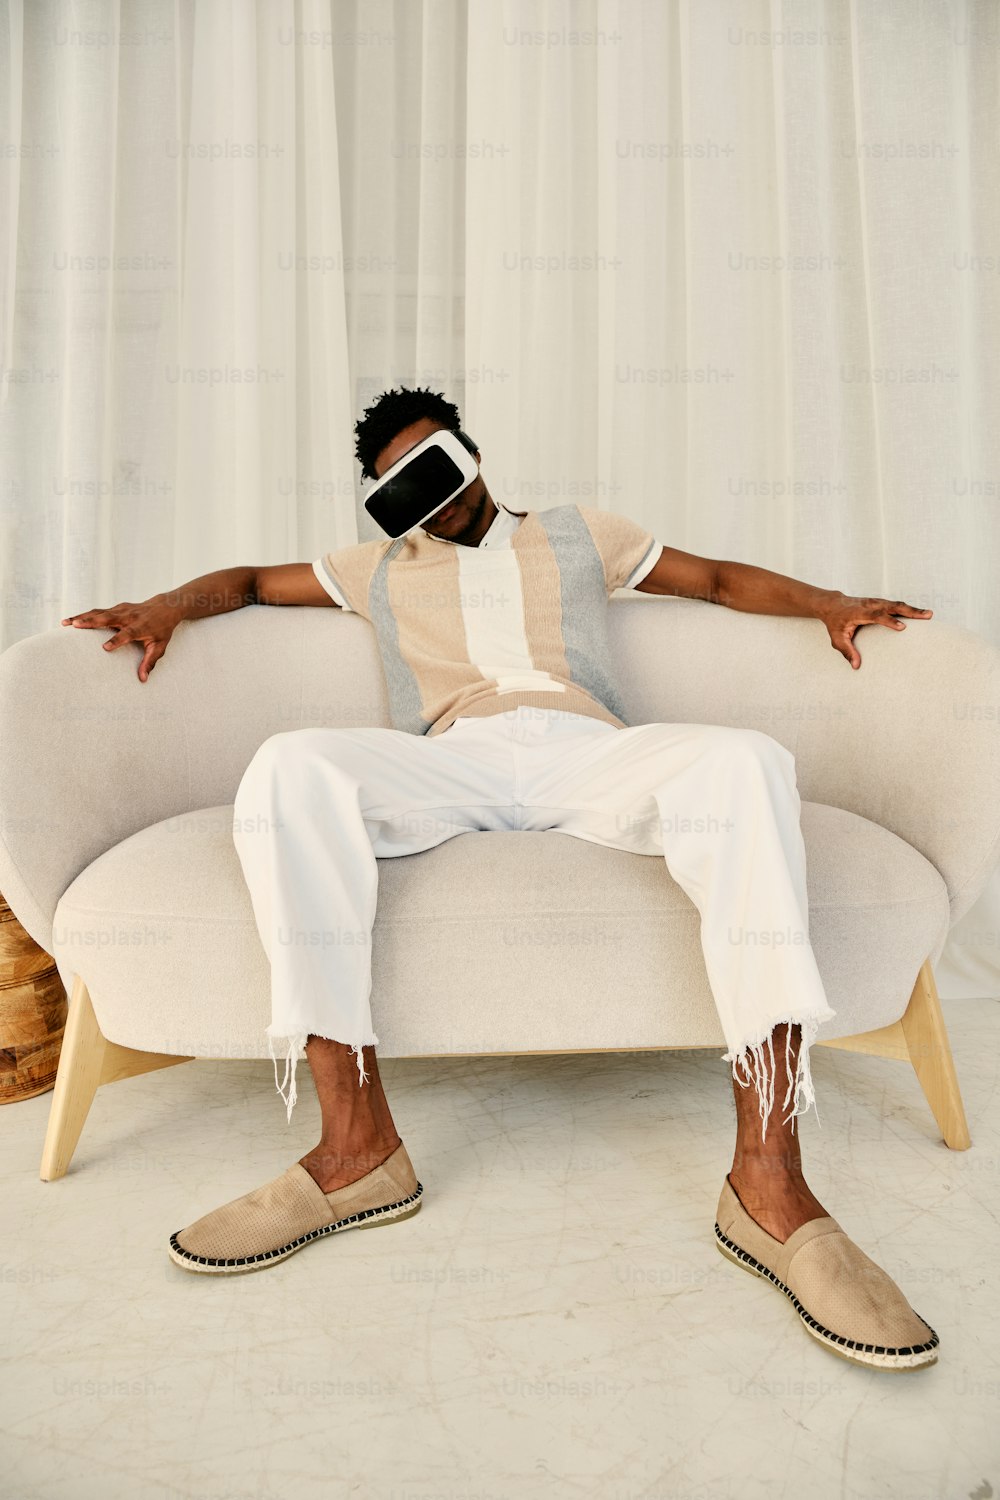 a man sitting on a couch wearing a blindfold